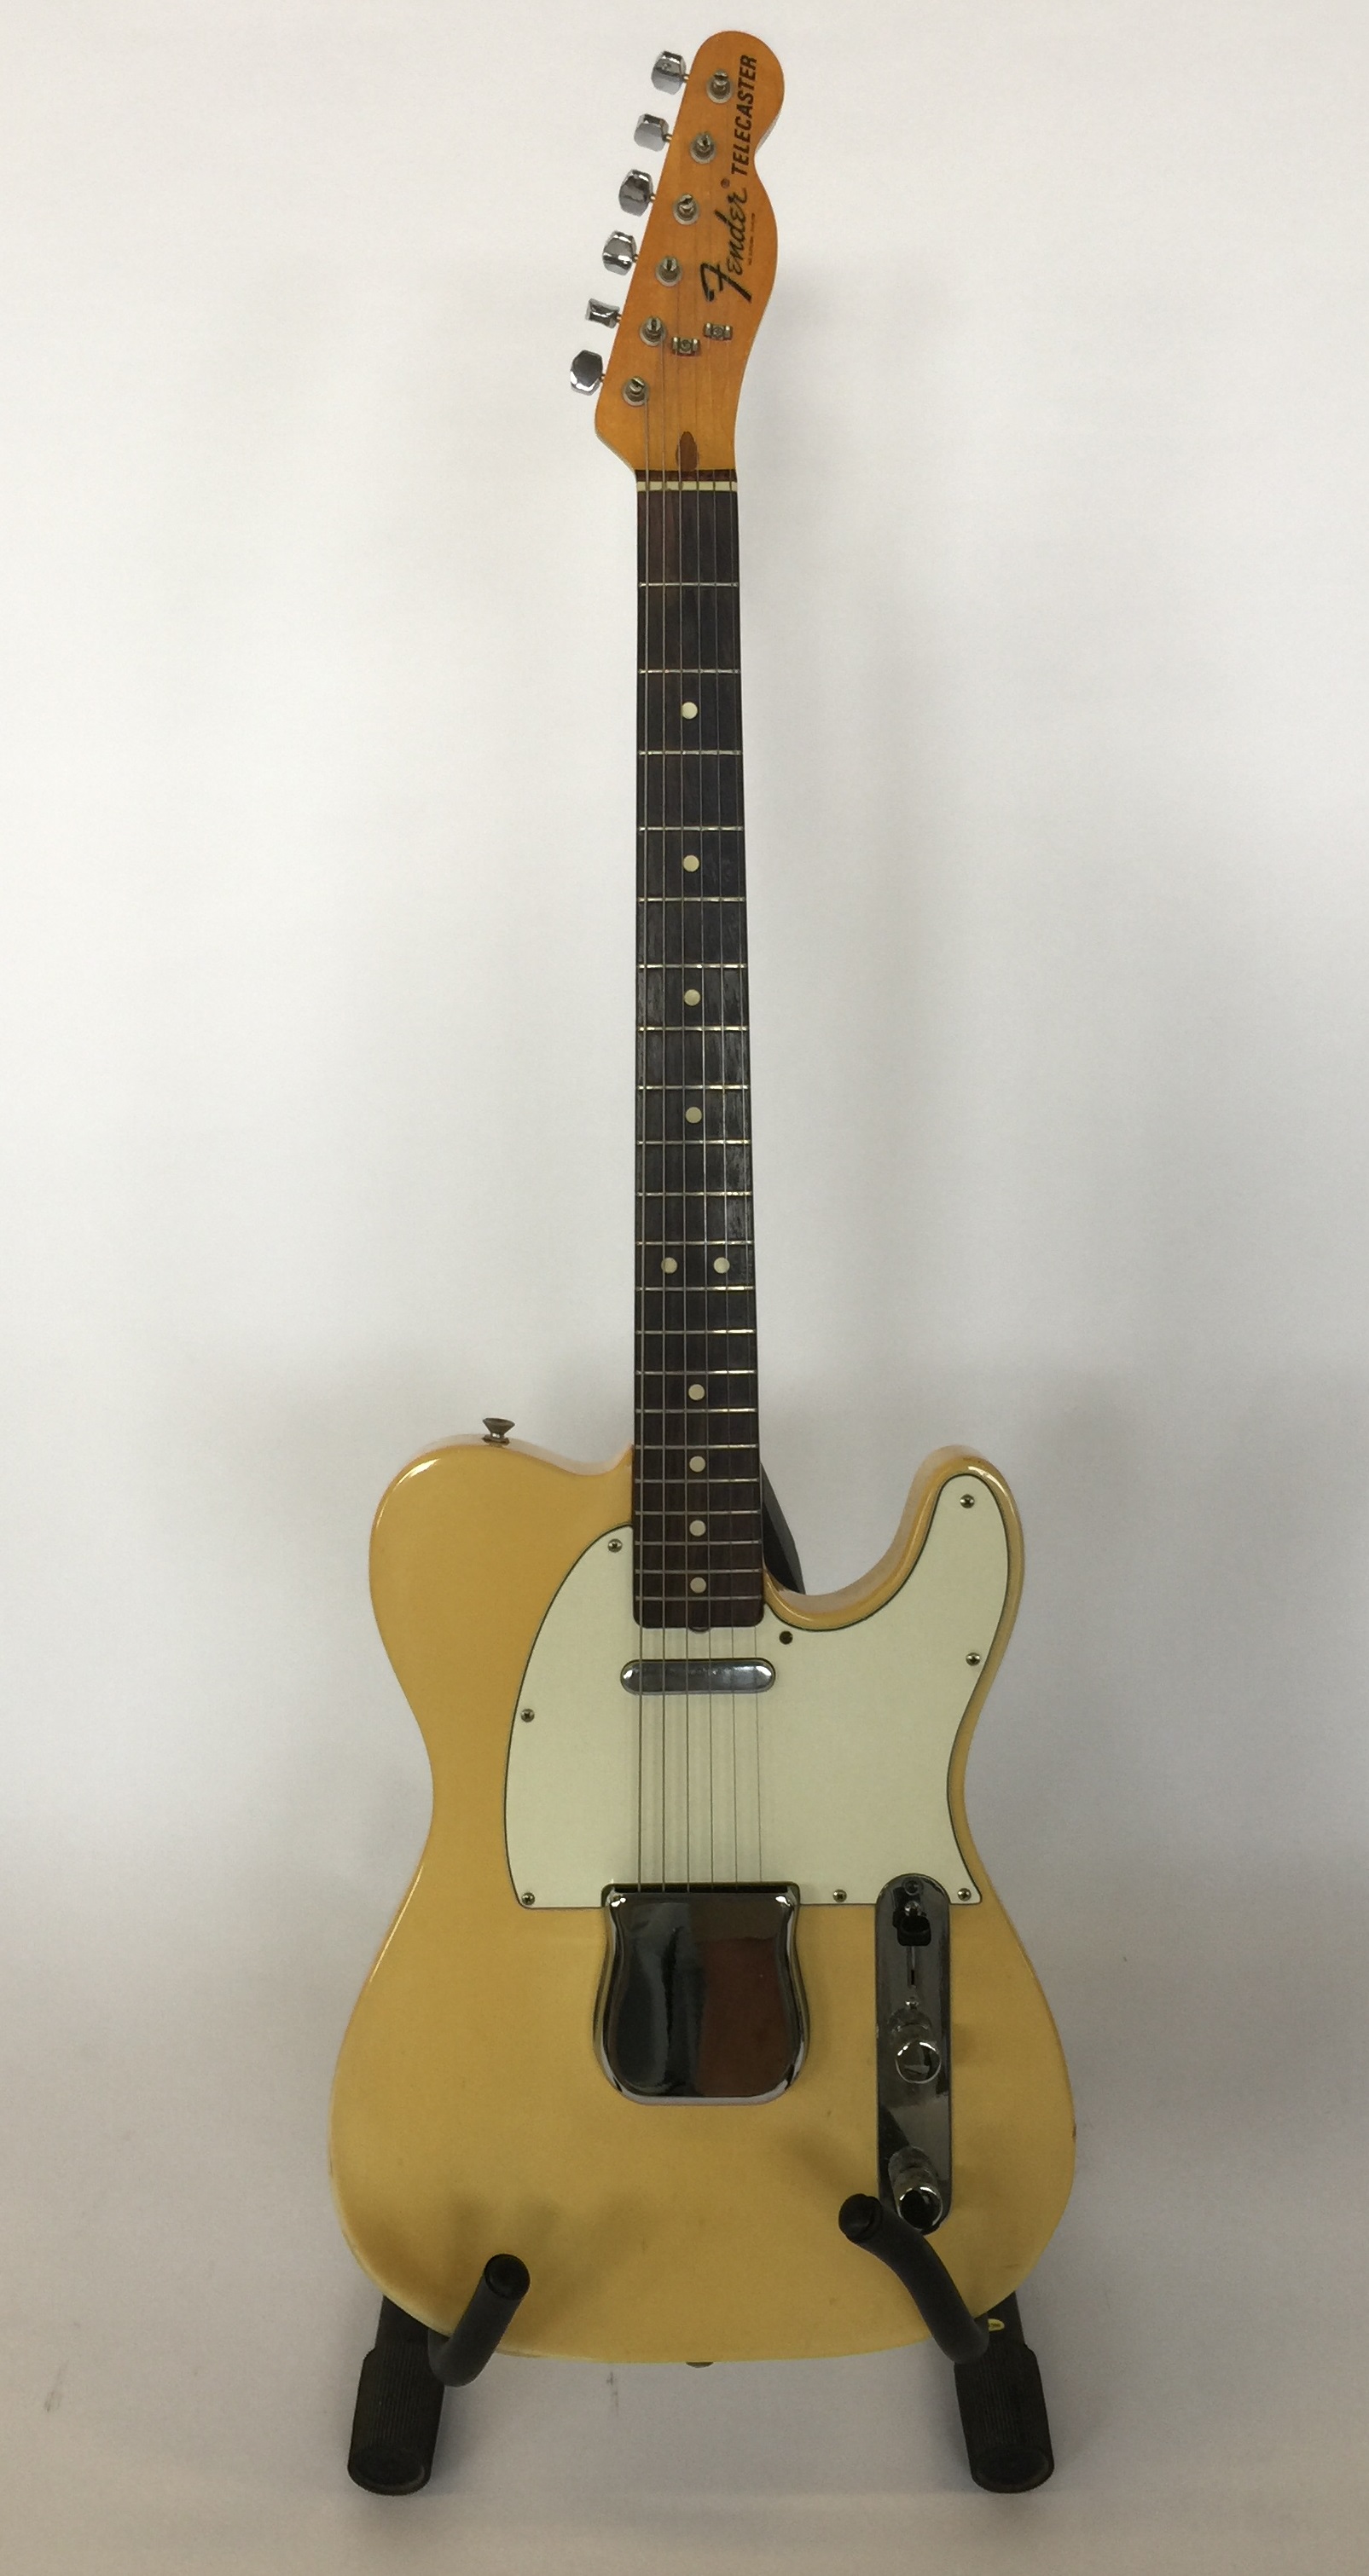 FENDER TELECASTER 1973 BLONDE - completely original and stunning example that has had one owner